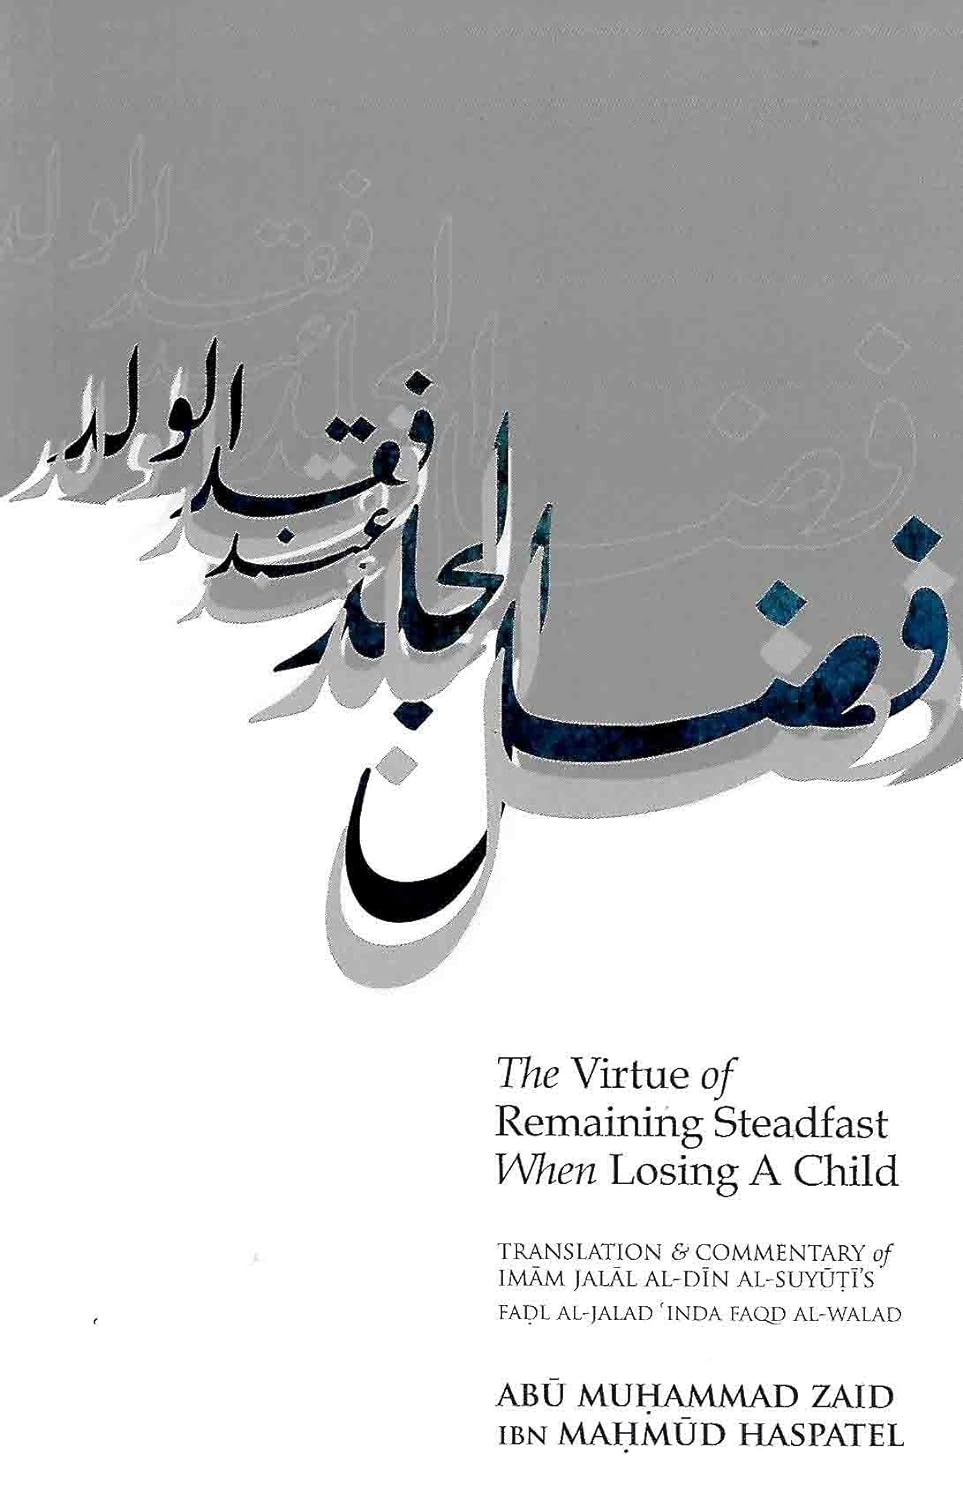 The Virtue of Remaining Steadfast When Losing a Child